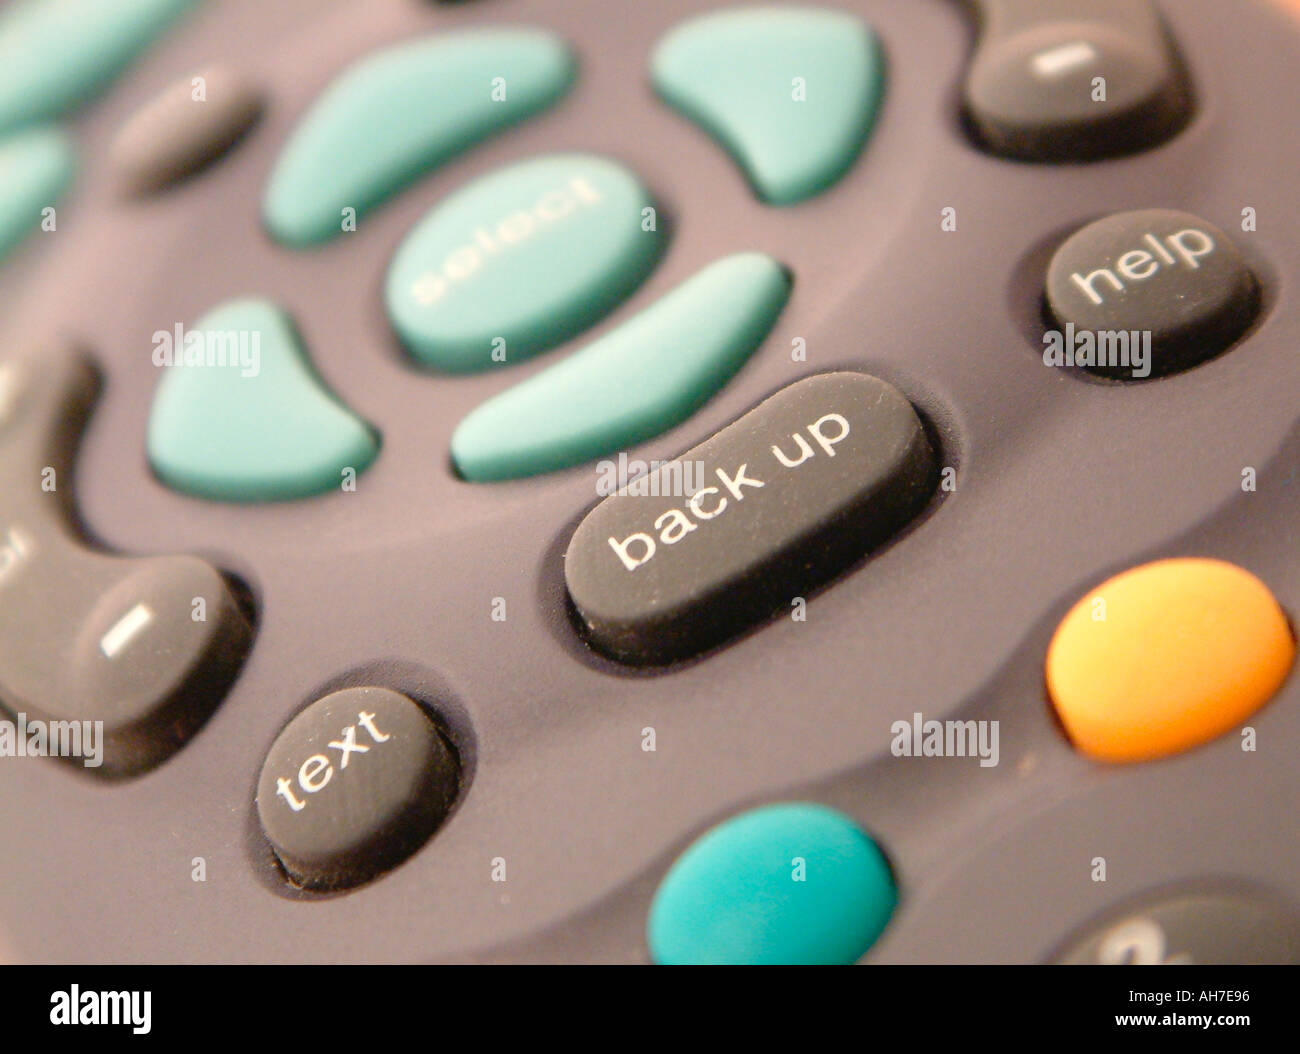 Close up of Sky remote control pad Stock Photo